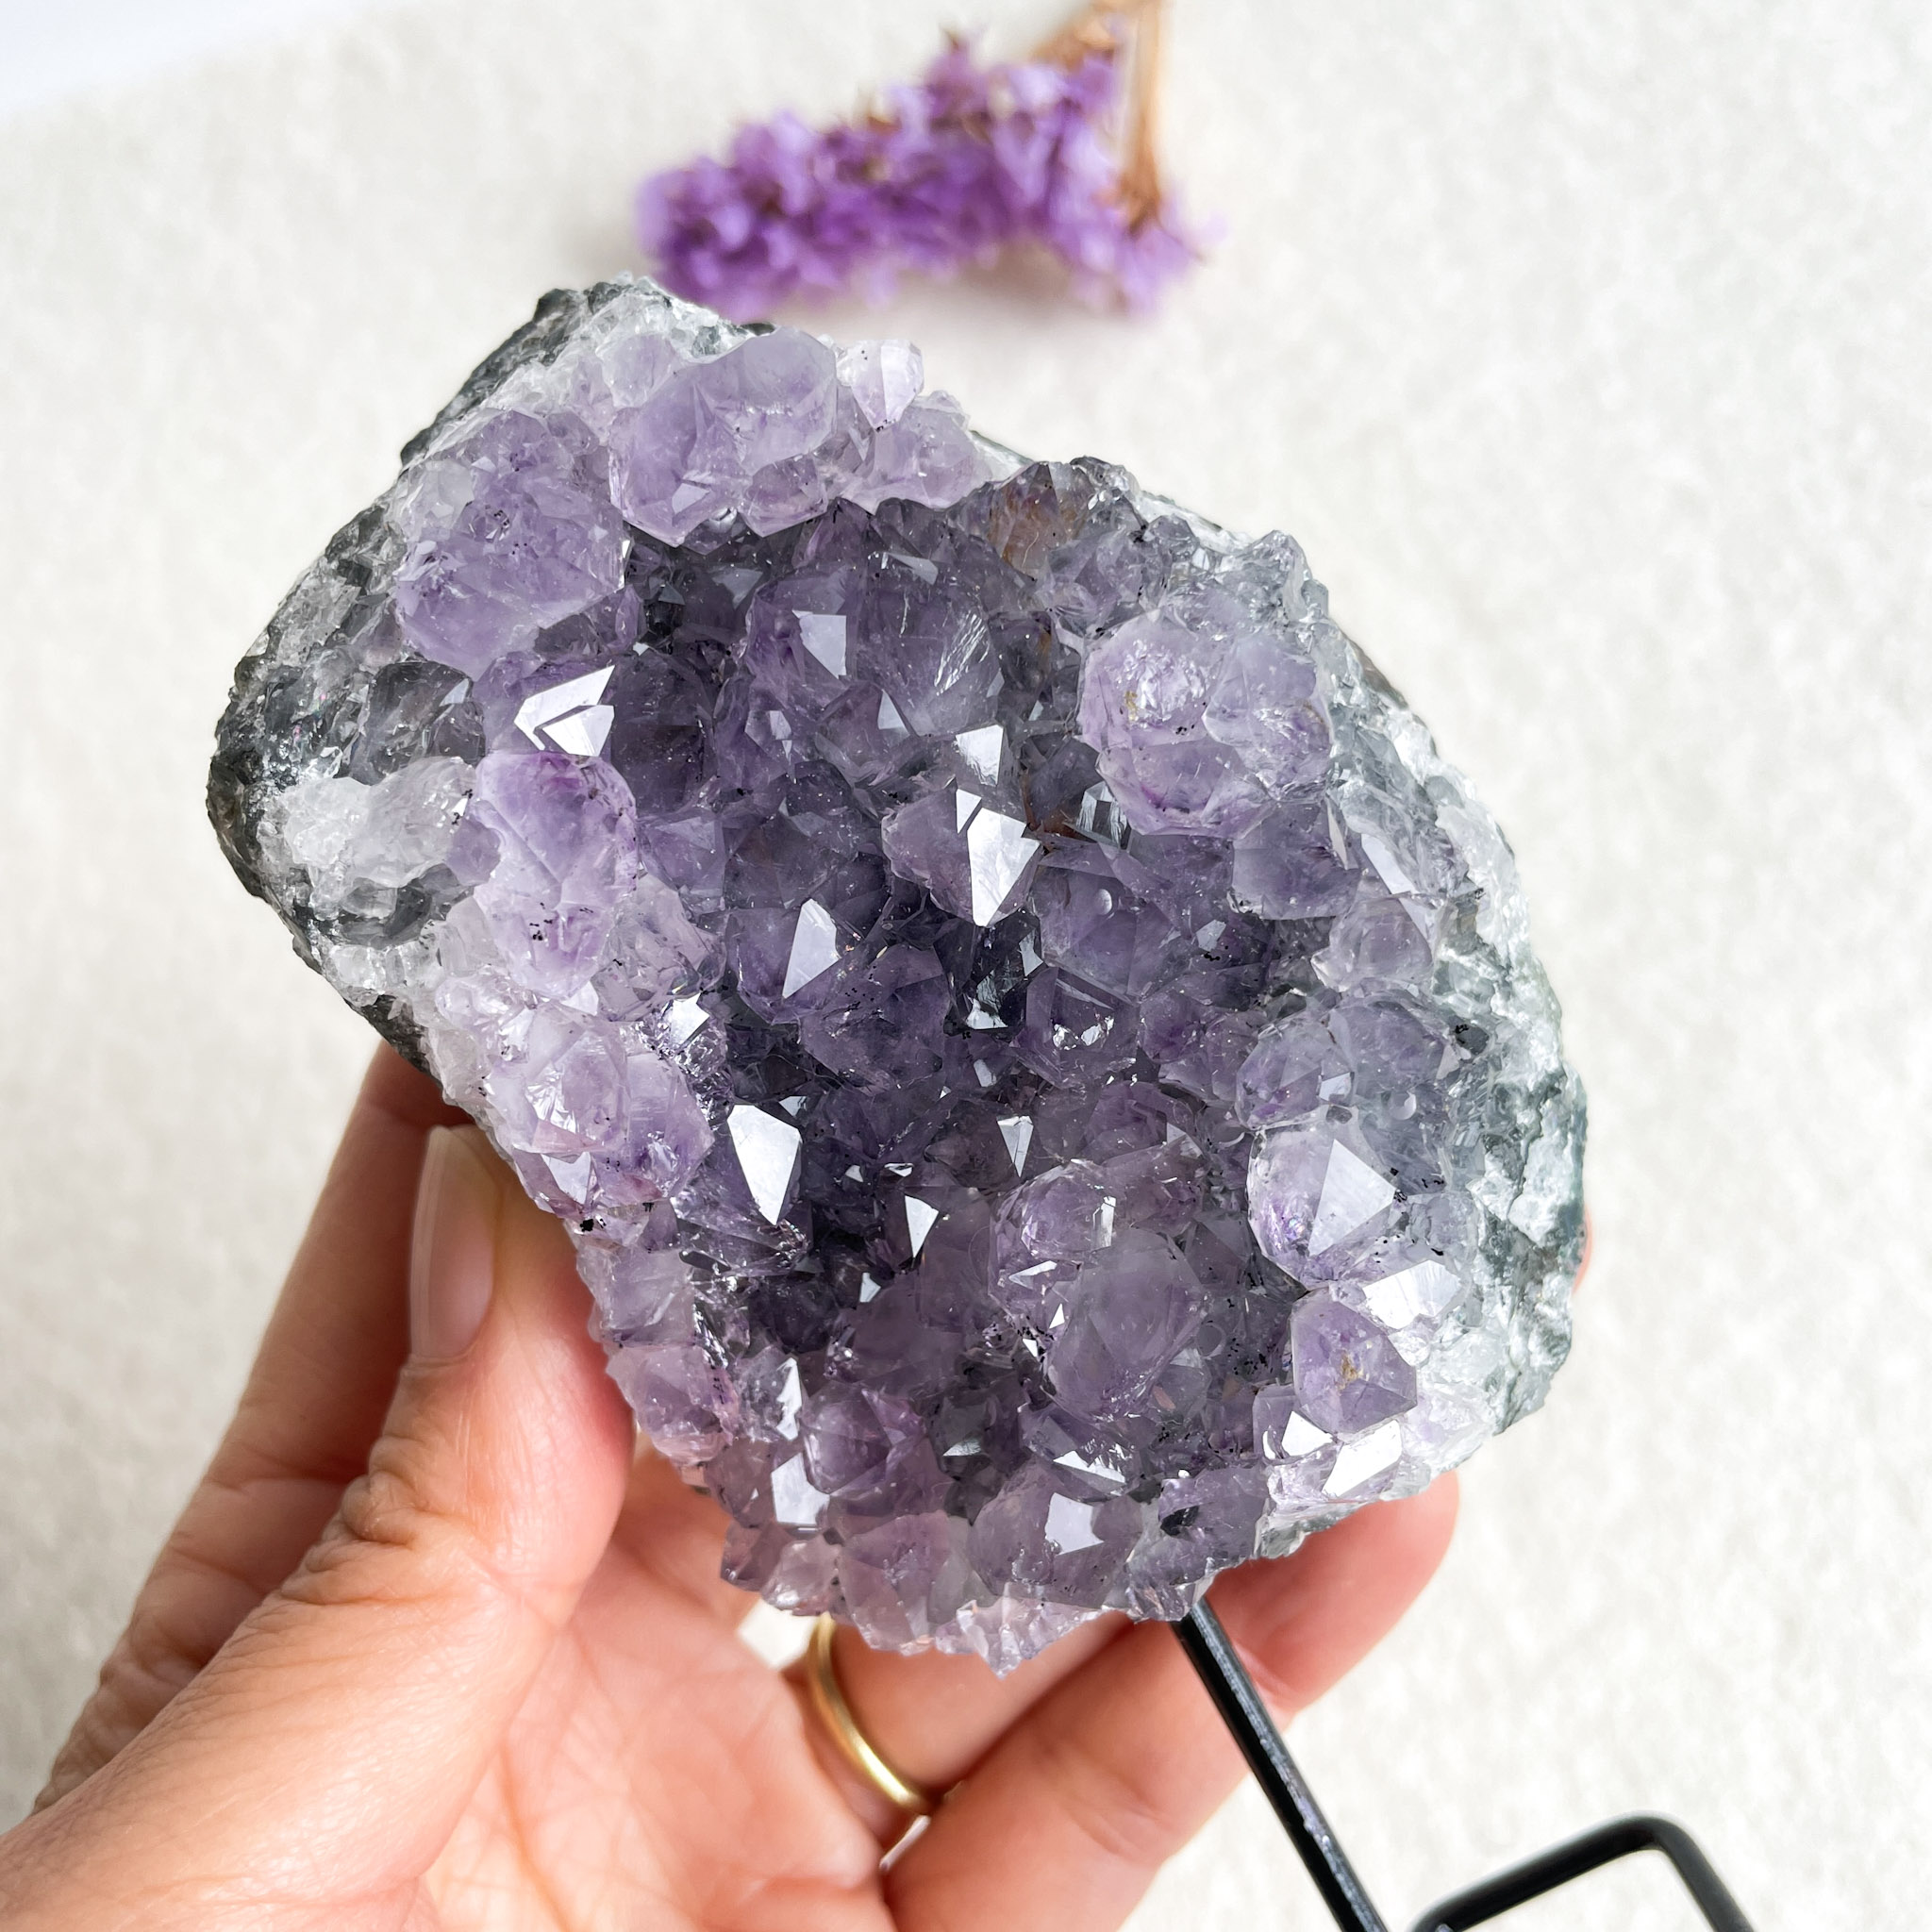 A person holds a large amethyst geode with well-defined purple crystals against a light background, with a small purple flower in the top right corner.